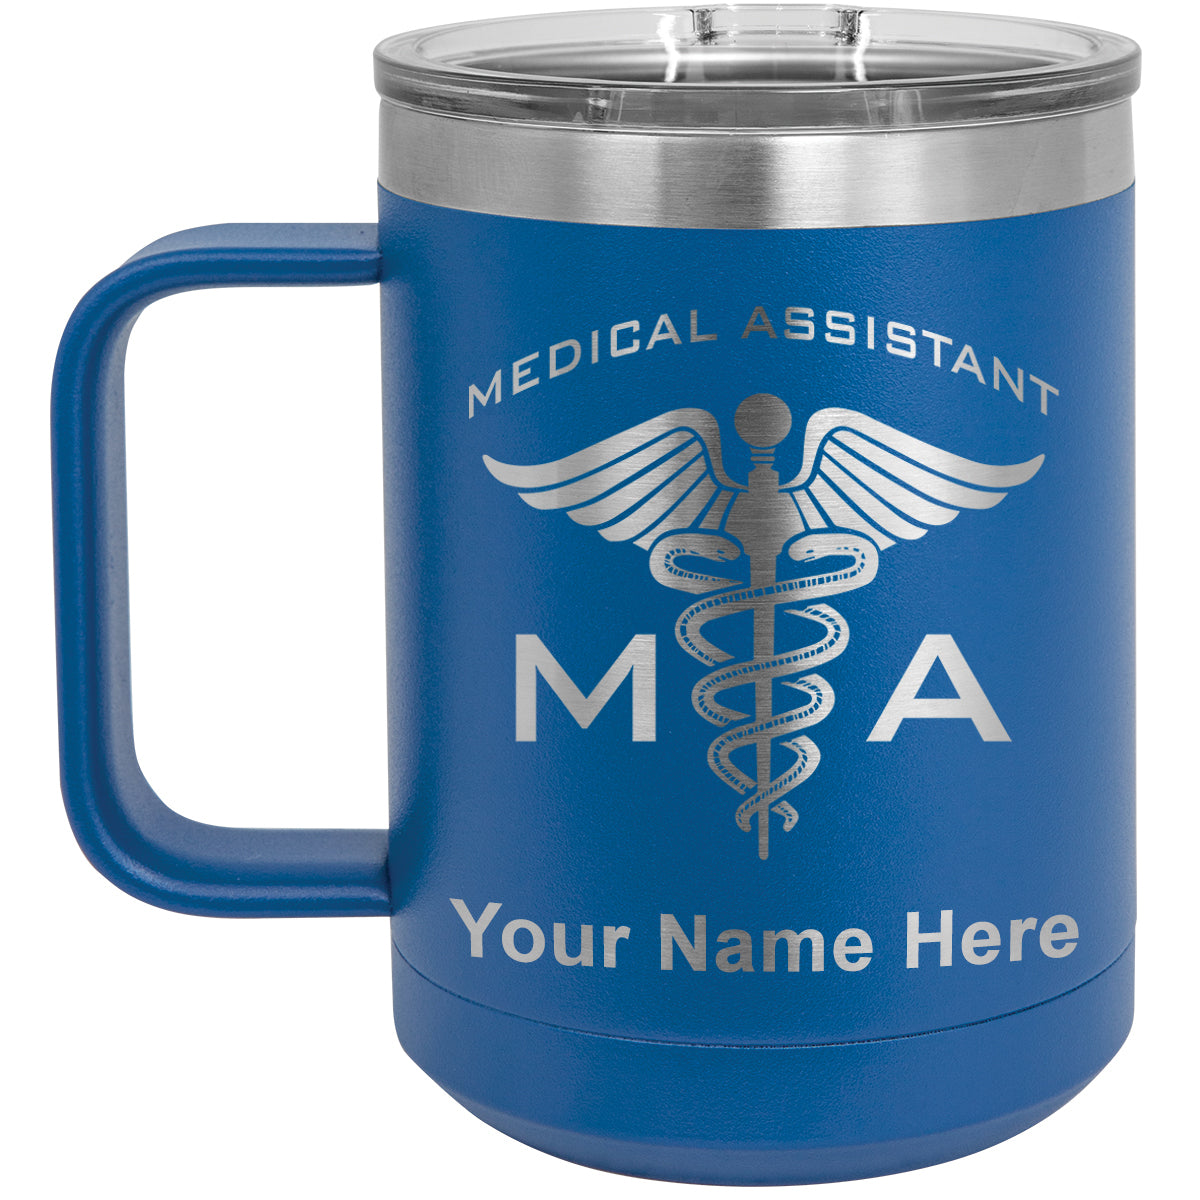 15oz Vacuum Insulated Coffee Mug, MA Medical Assistant, Personalized Engraving Included